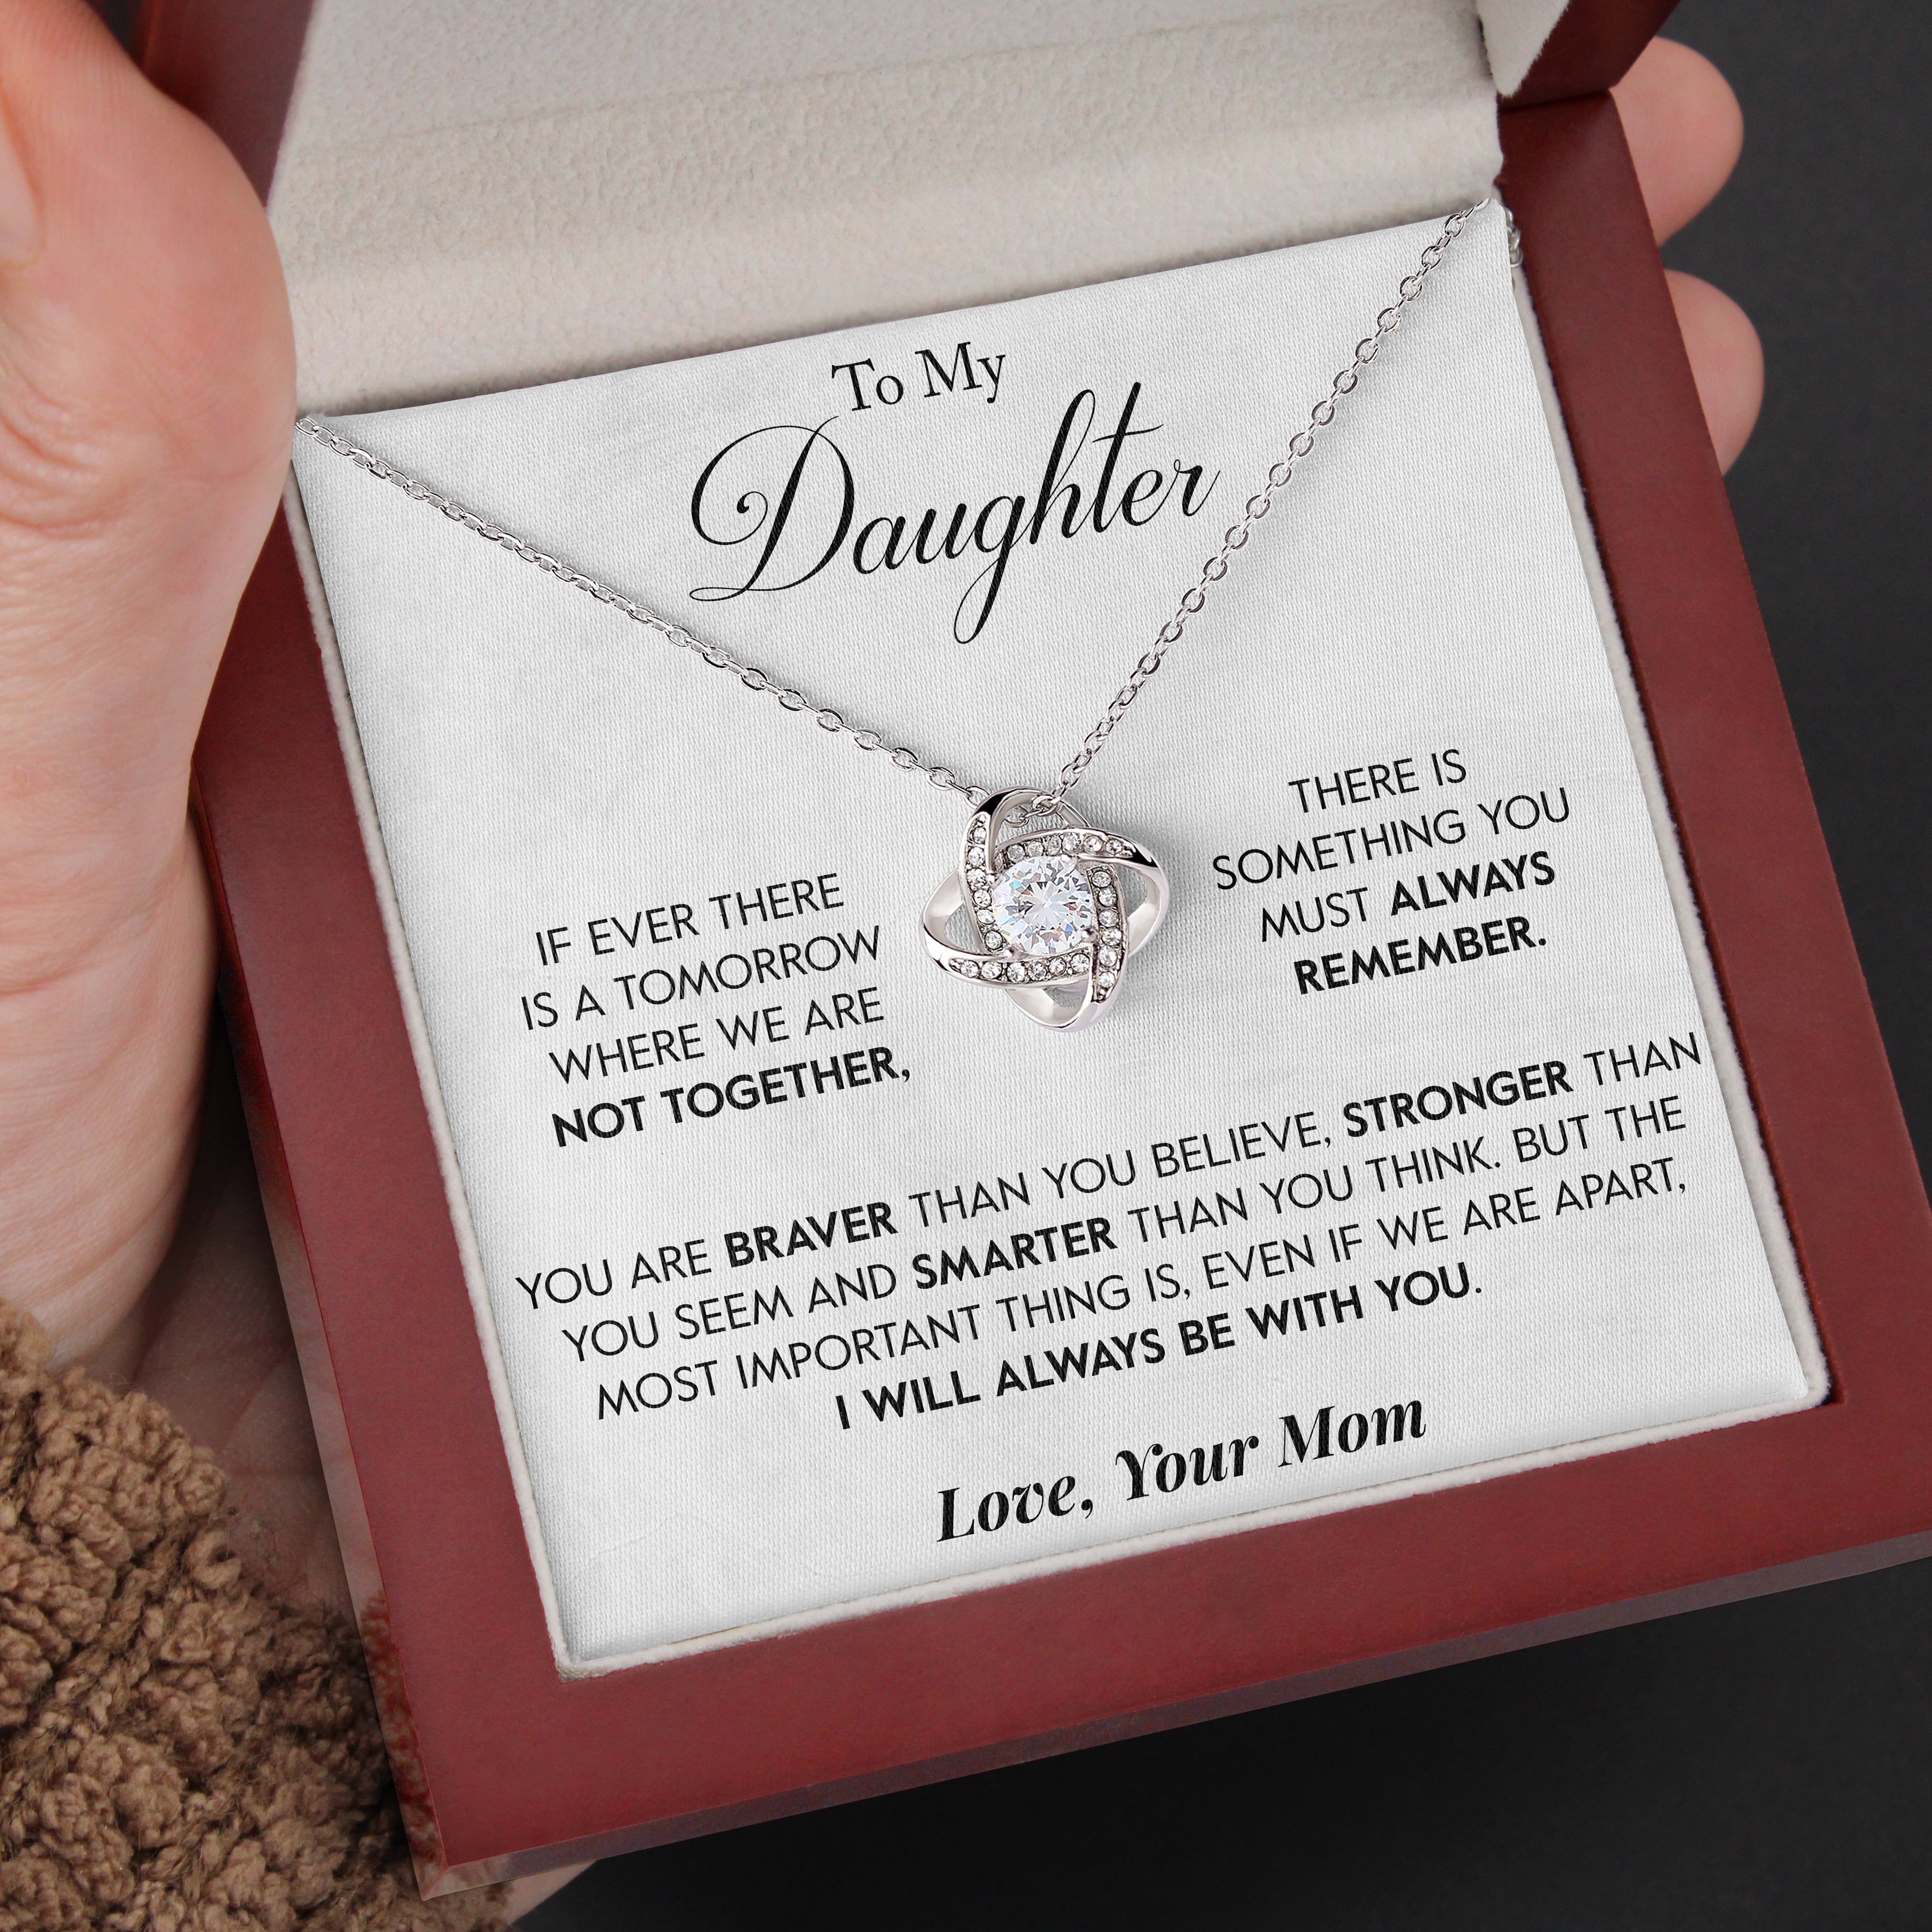 To My Daughter | "I Will Always Be With You" | Love Knot Necklace